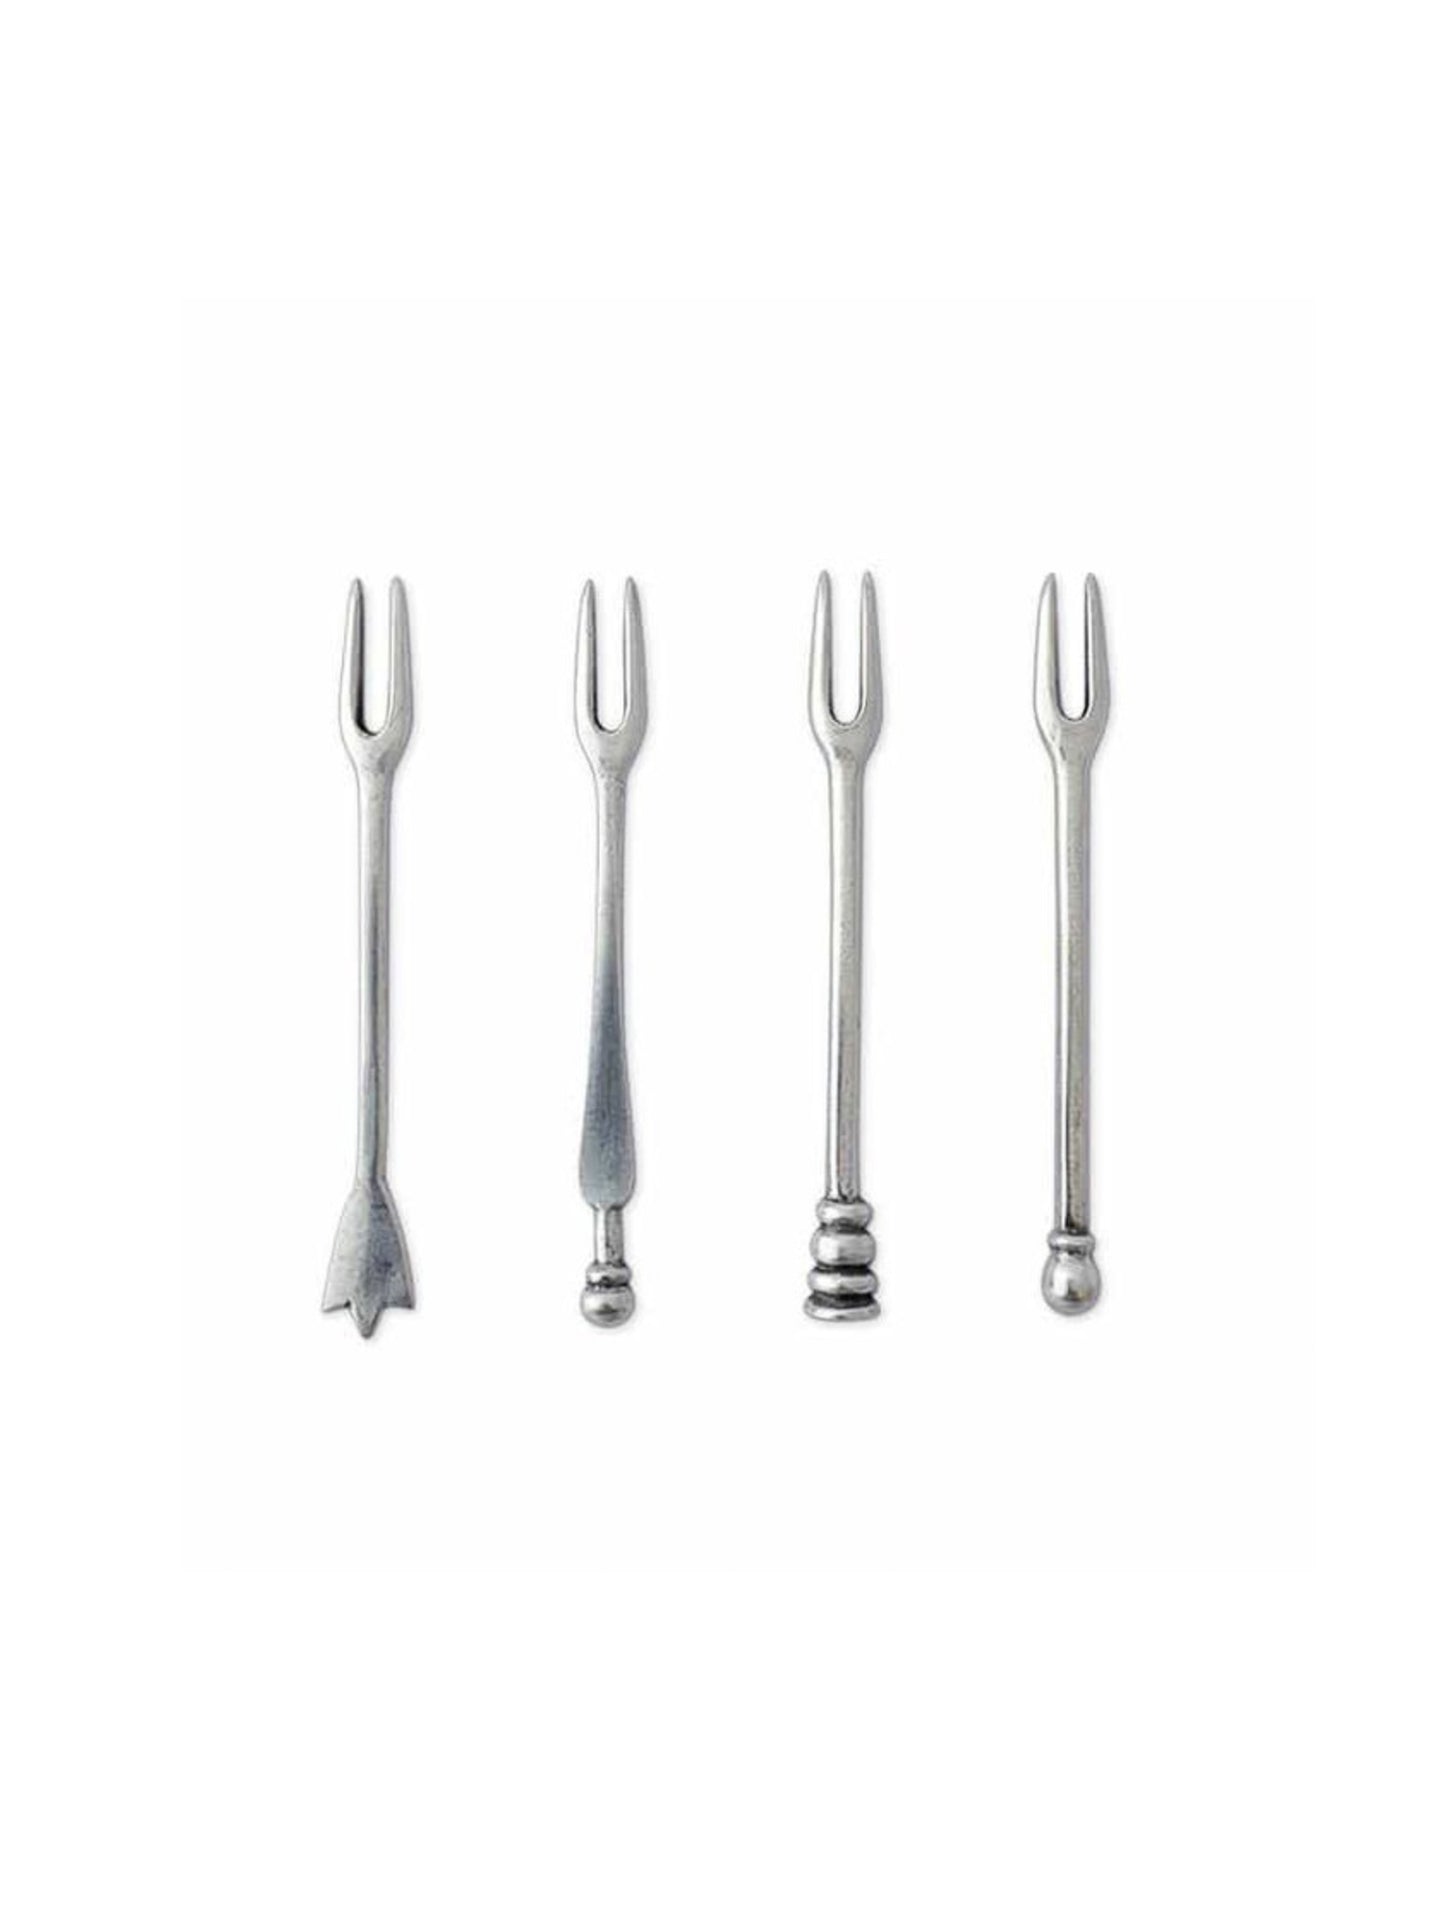 MATCH Pewter Cocktail Forks Weston Table